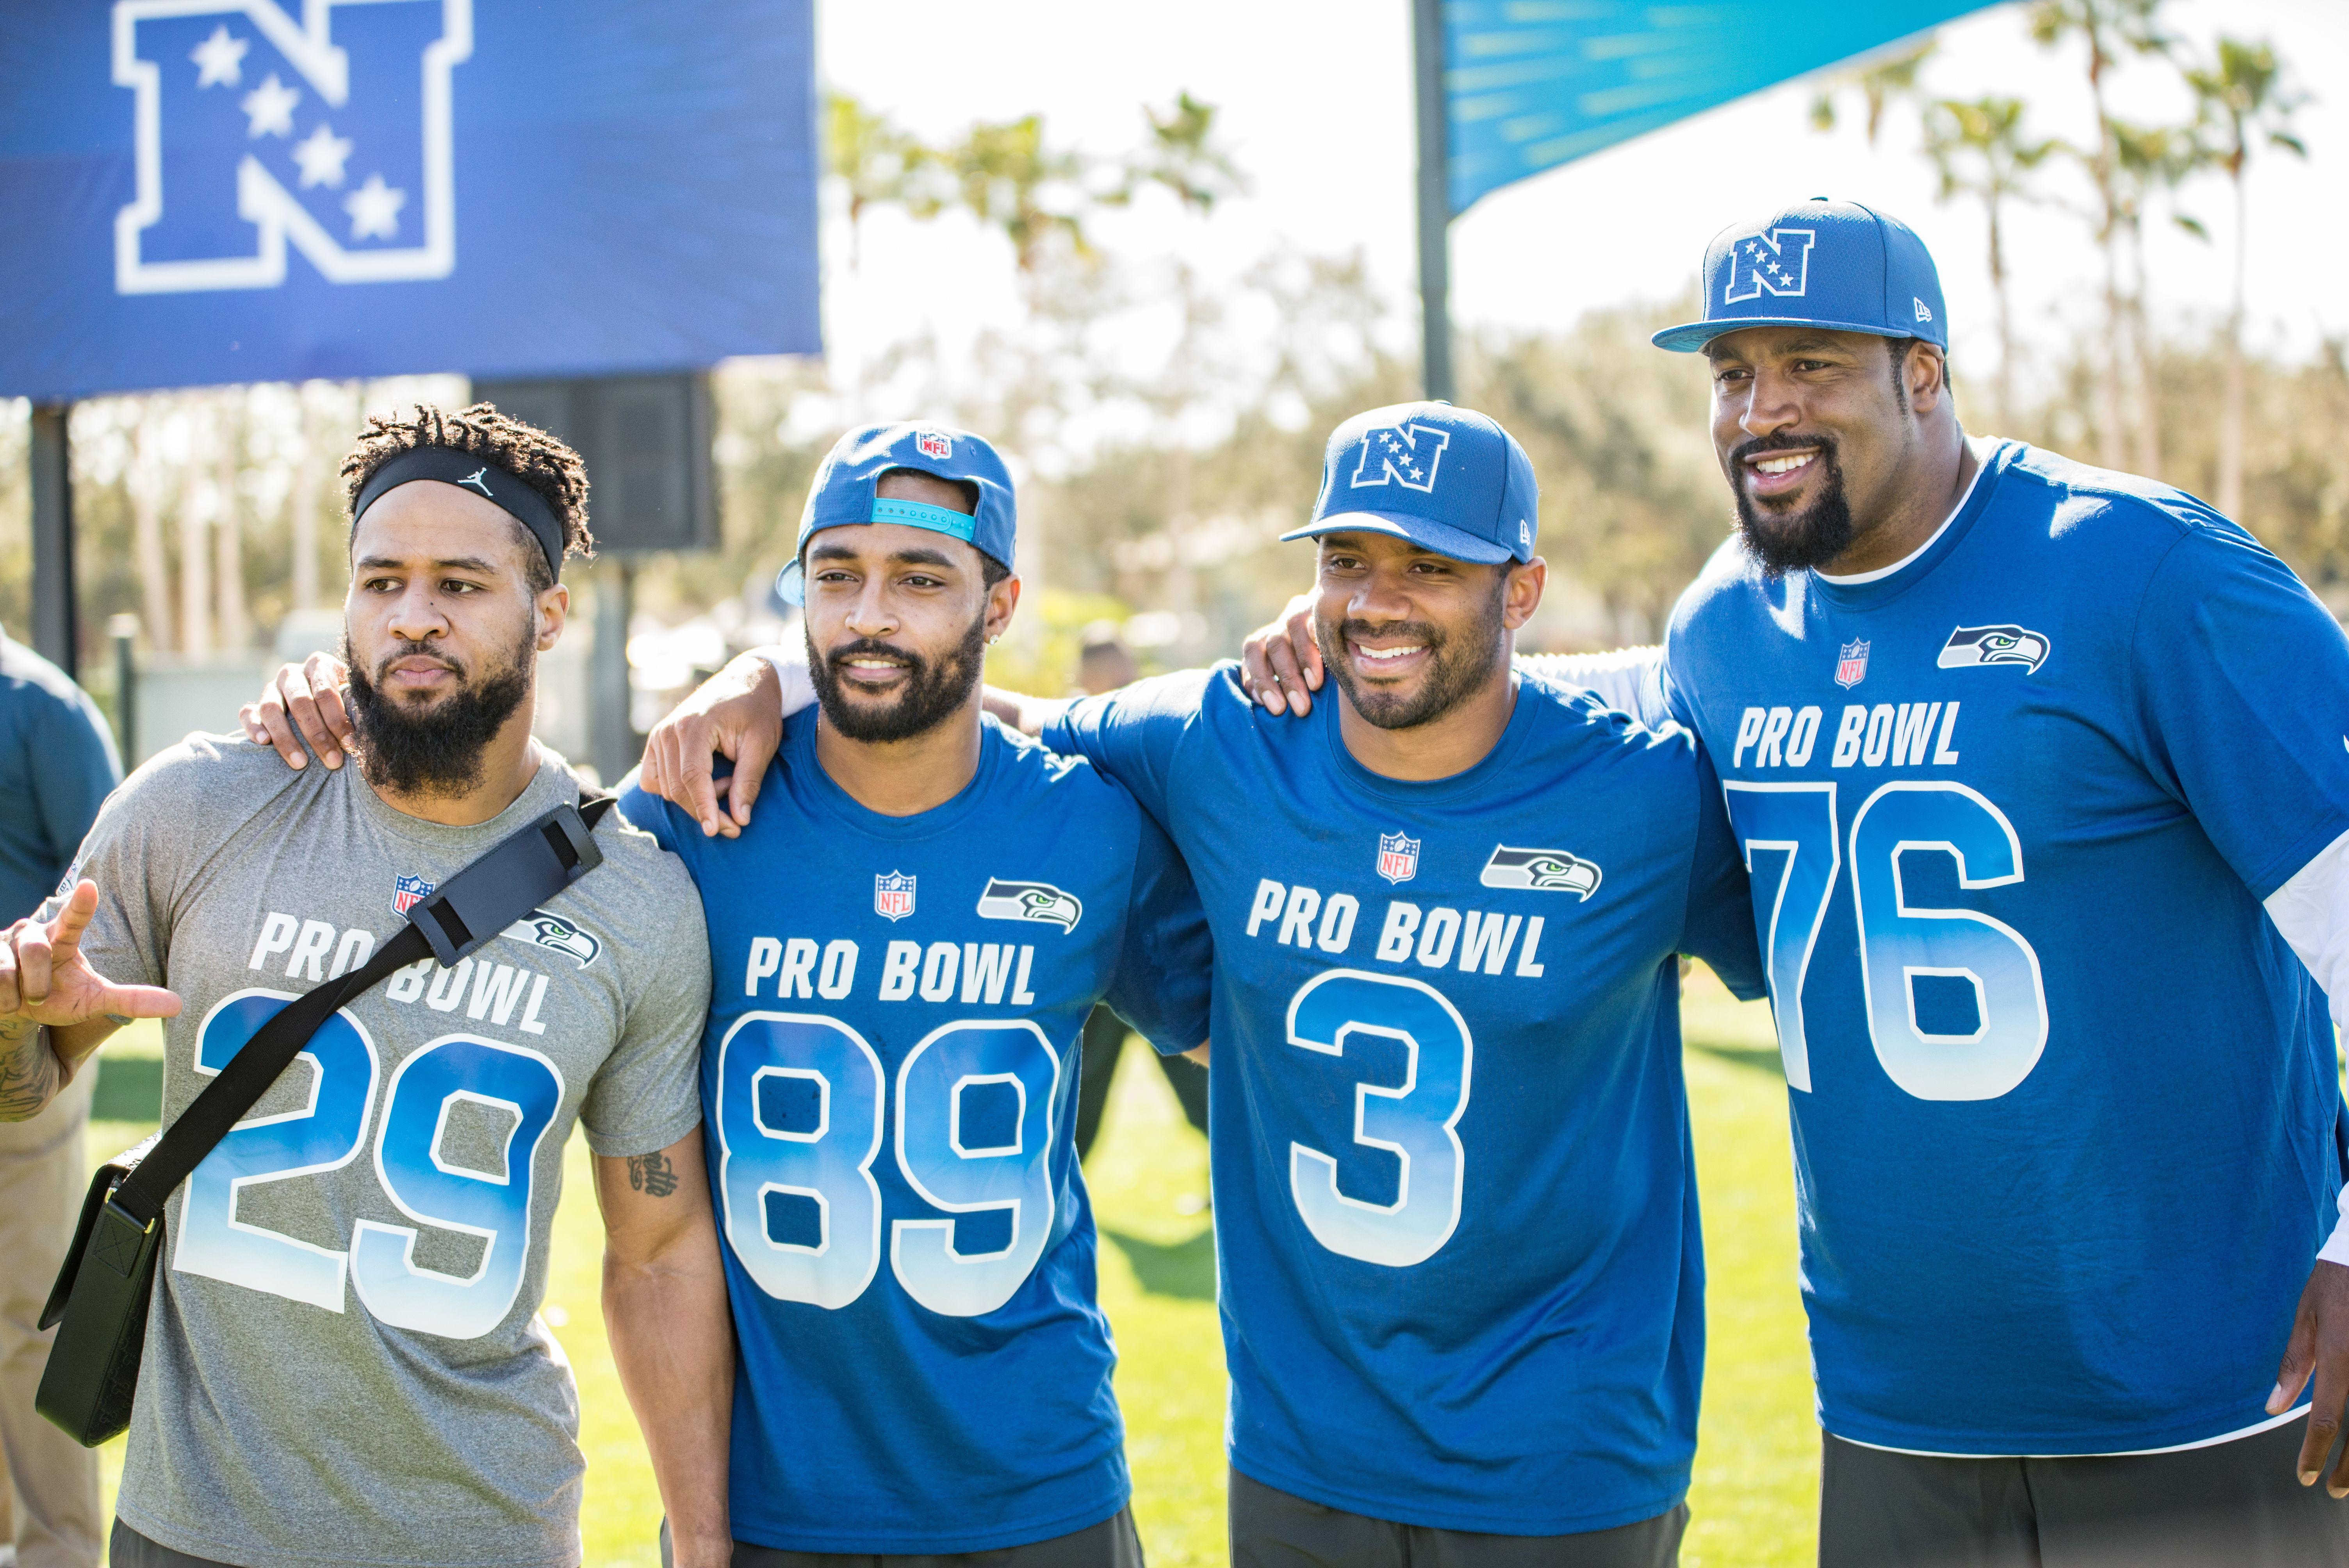 Pro Bowl Schedule, Practice Times & Gameday Information